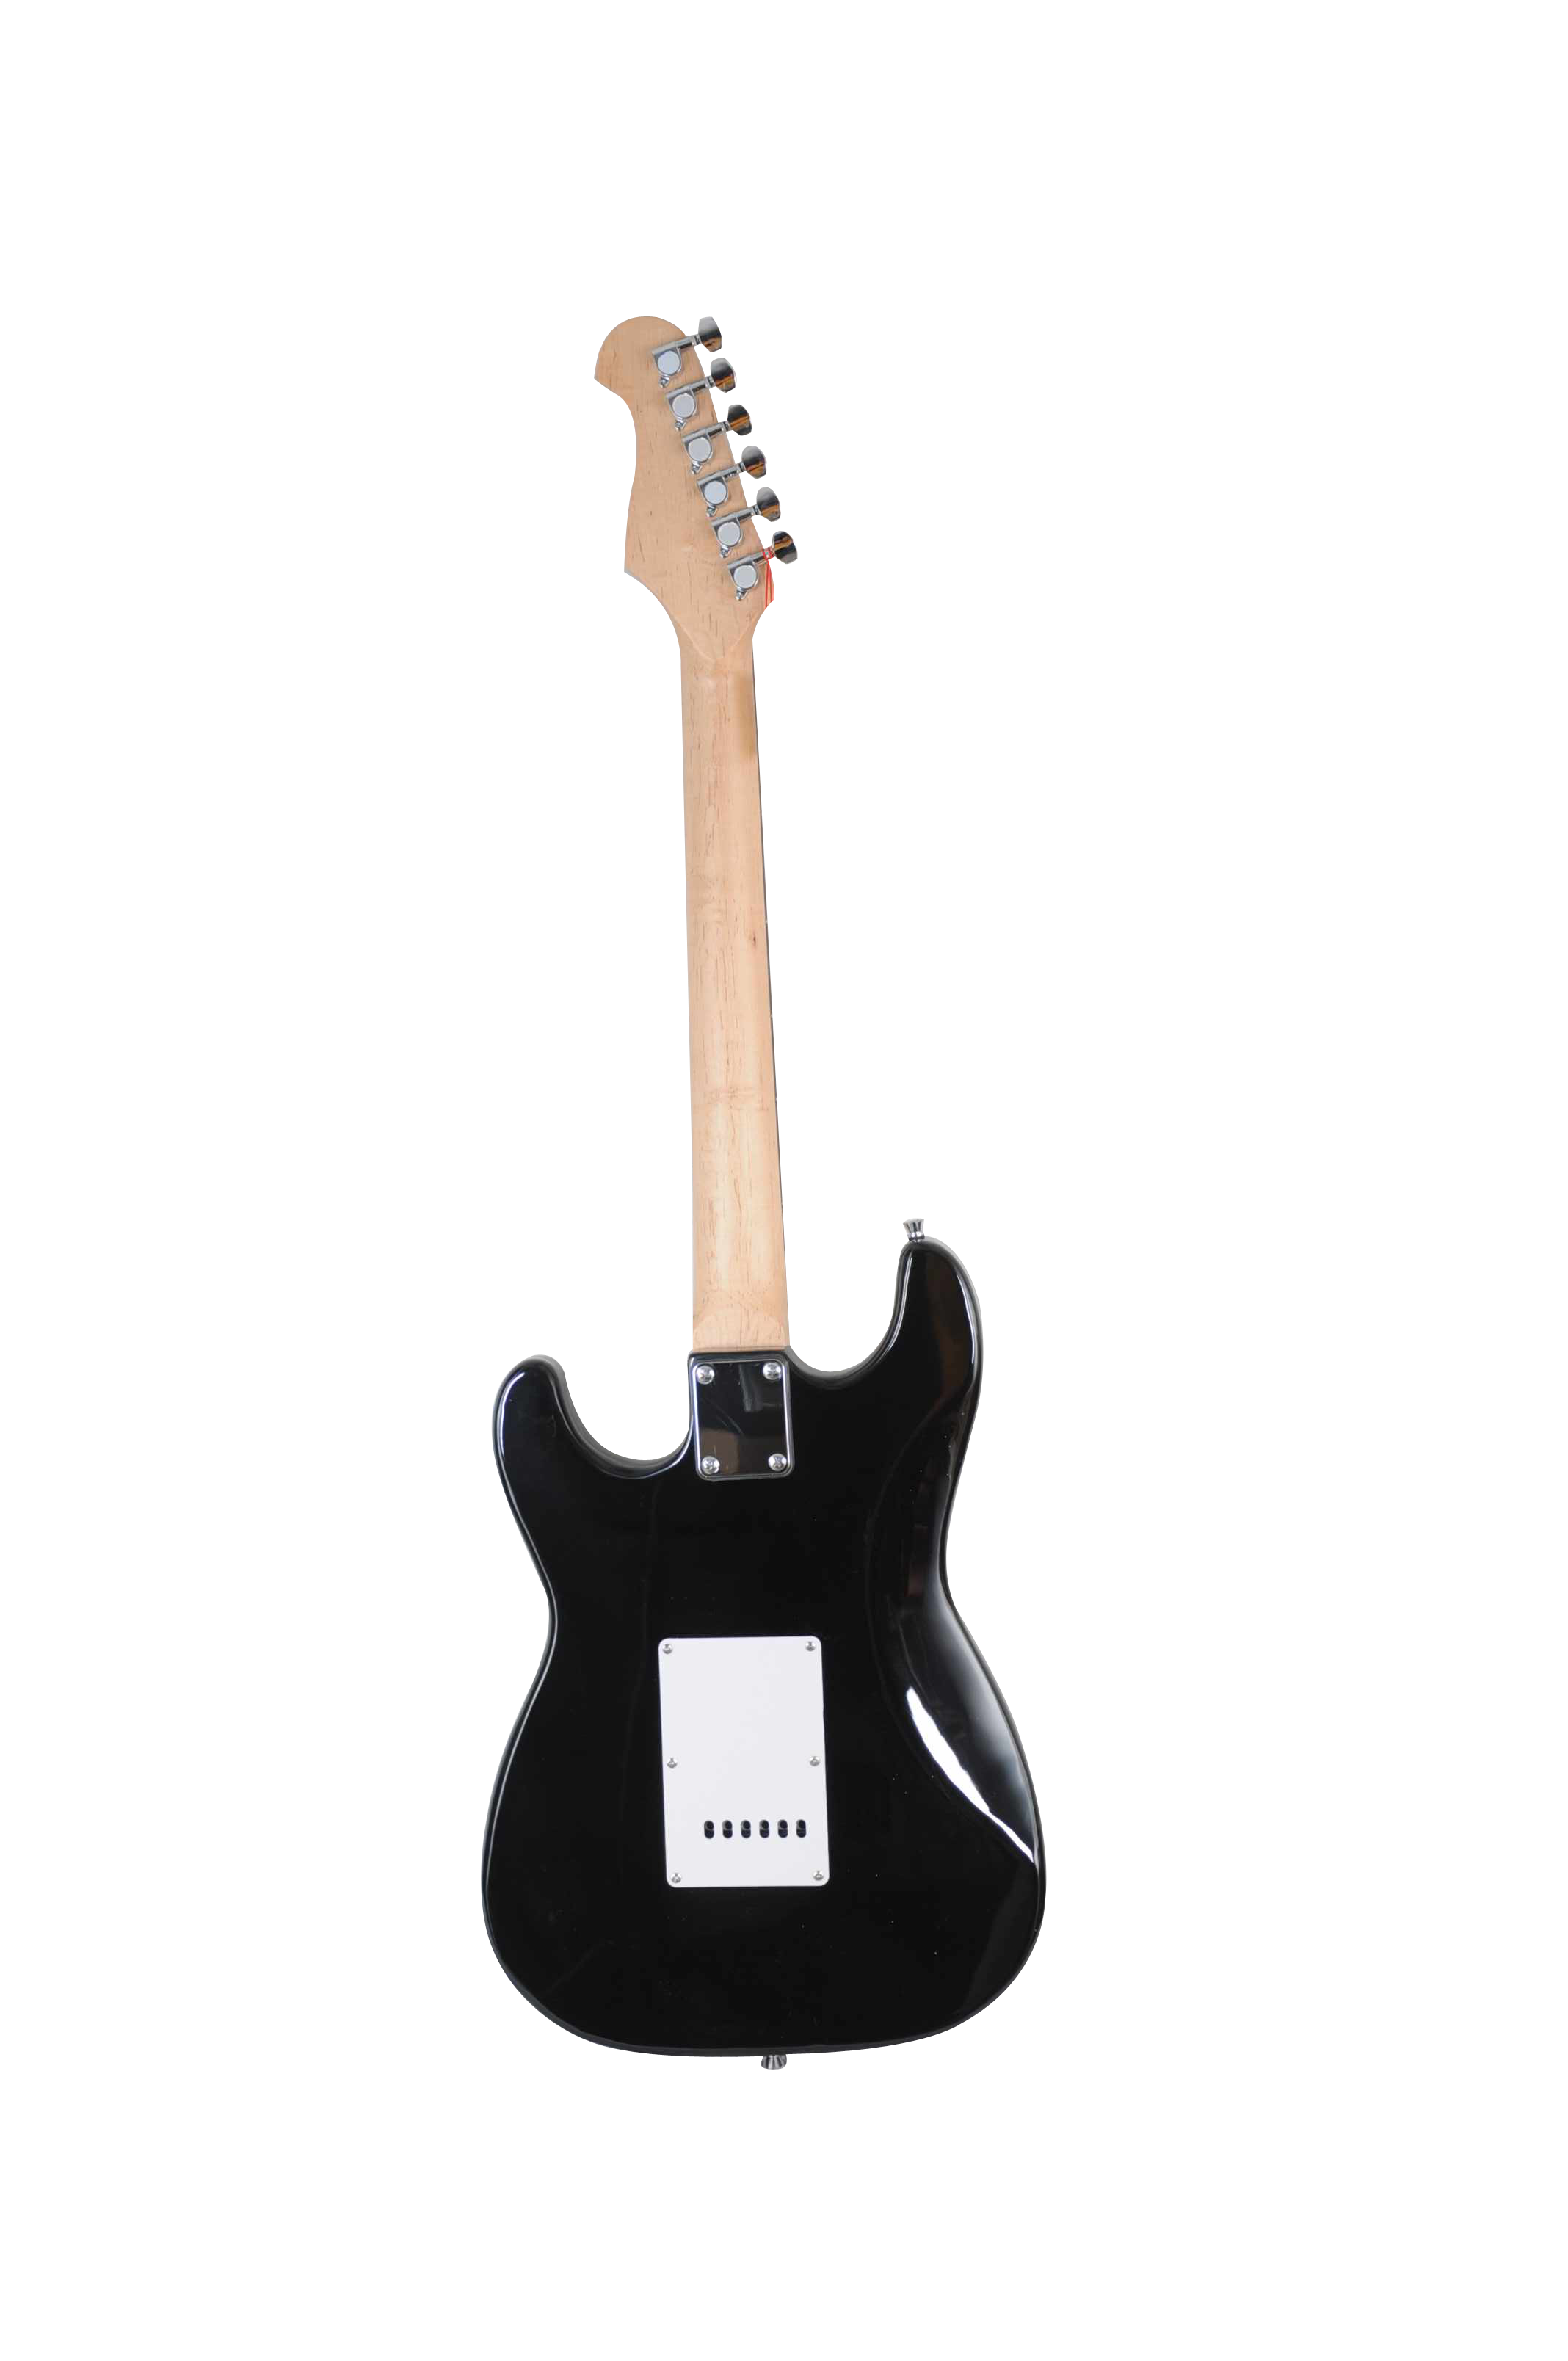 [Aileen] High Quality All Solid ST Electric Guitar Wholesale (EGS112)